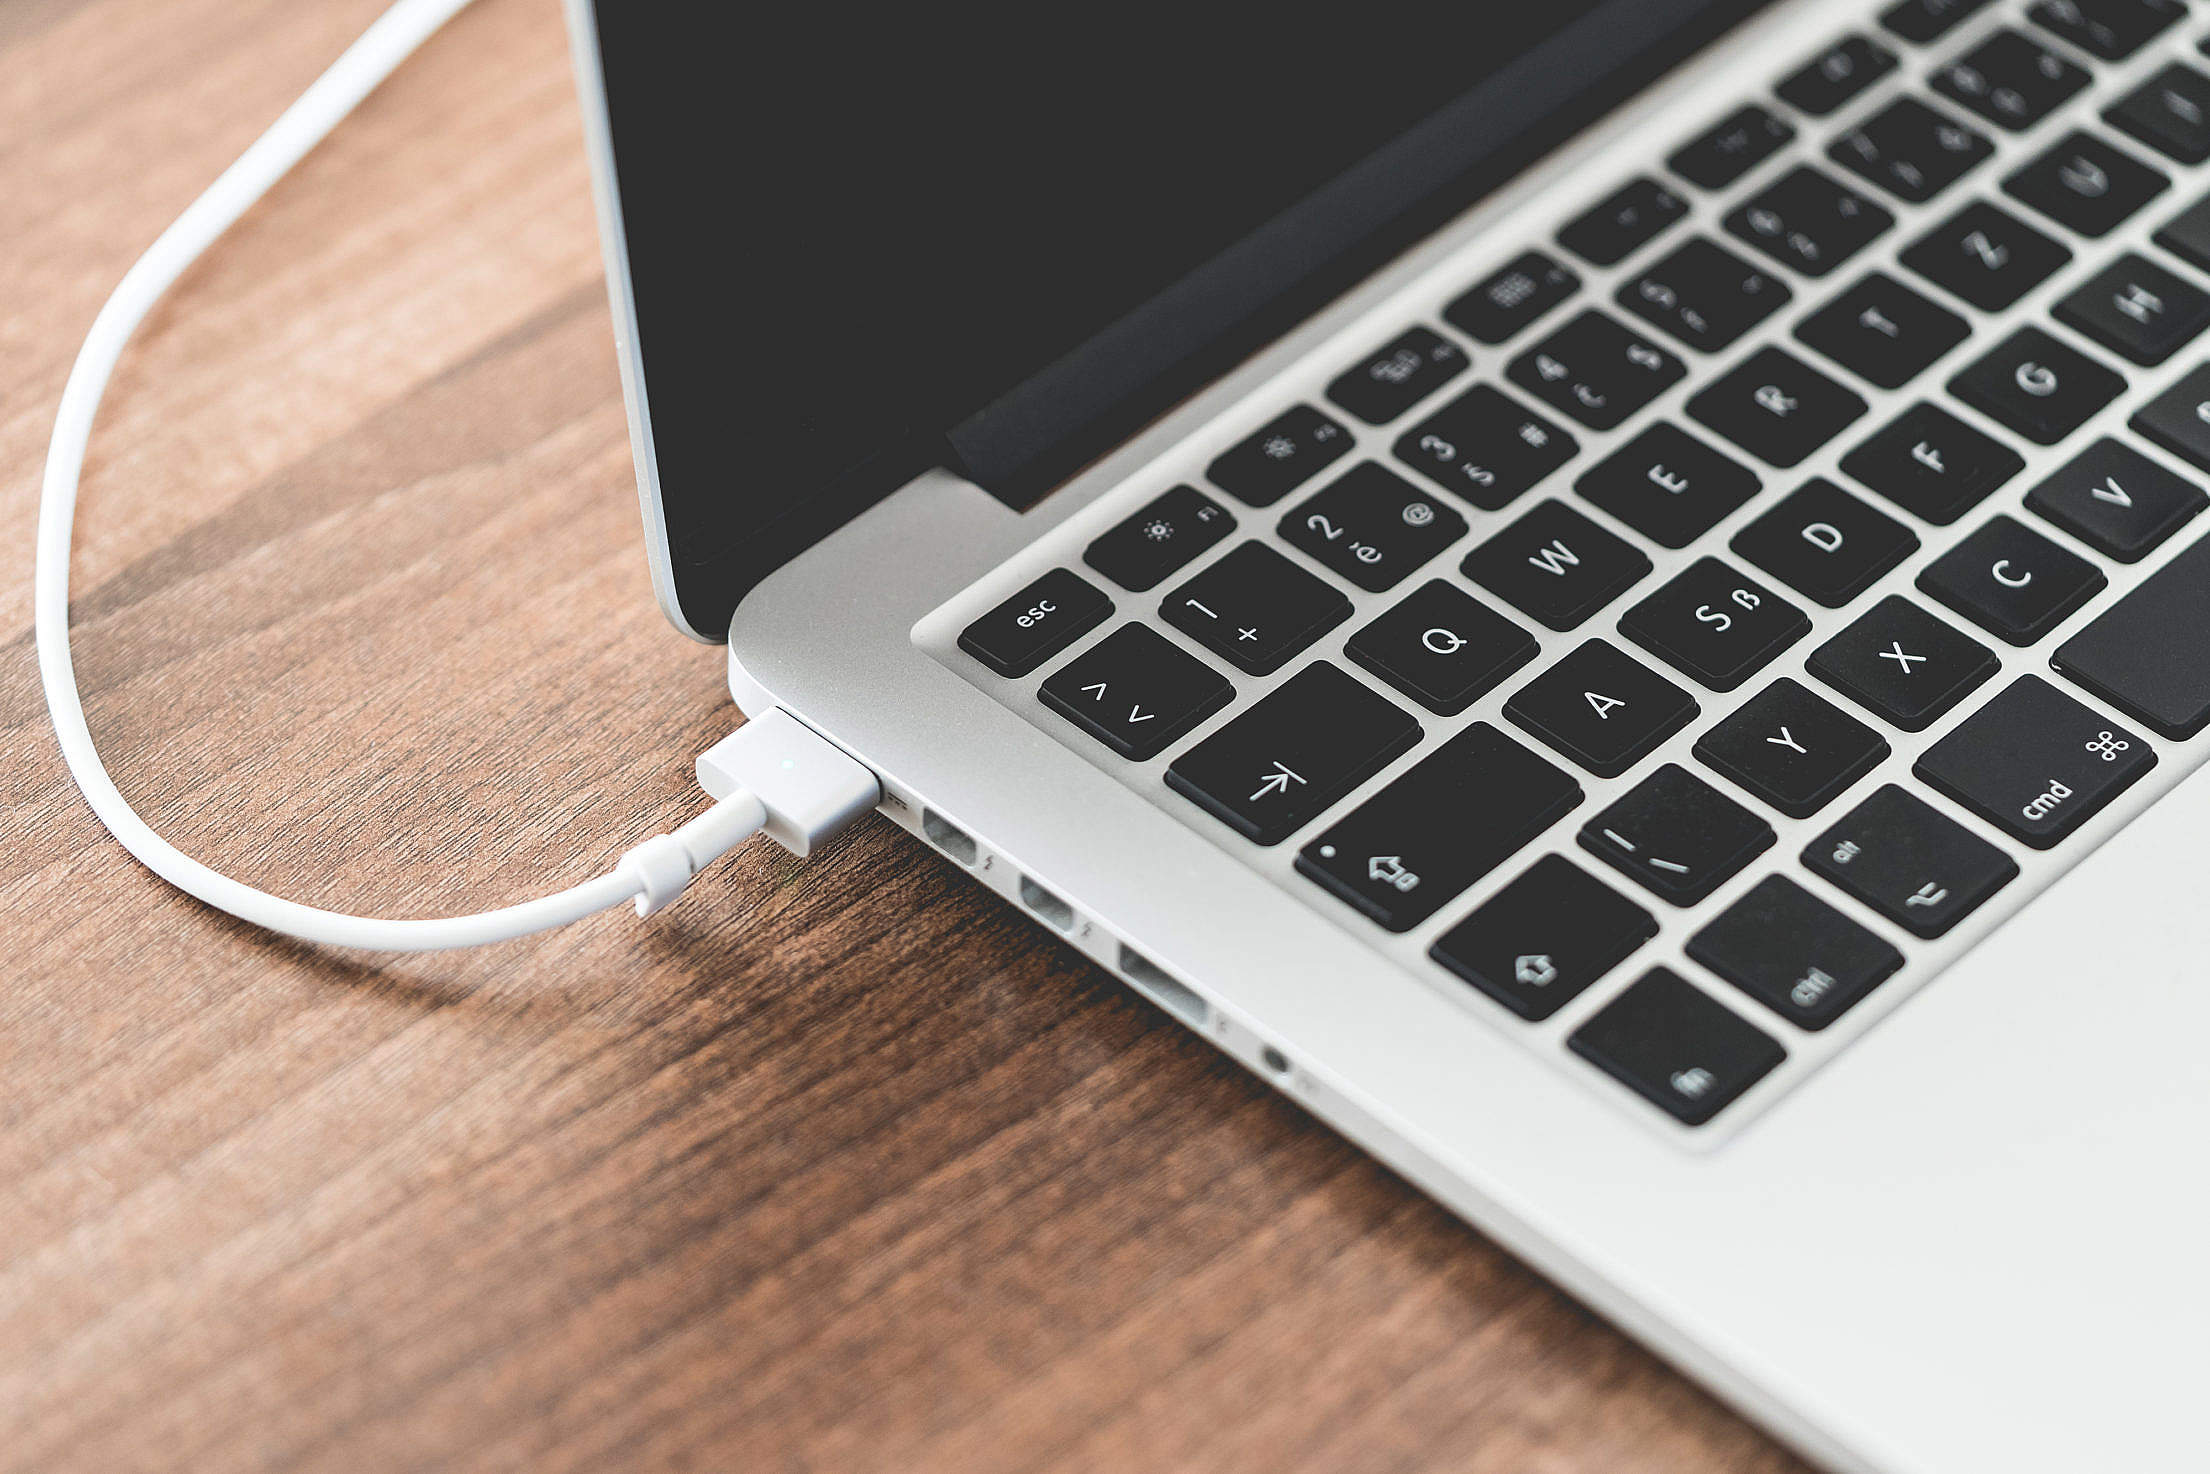 MagSafe Charging Cable and MacBook Laptop Ports Free Stock Photo